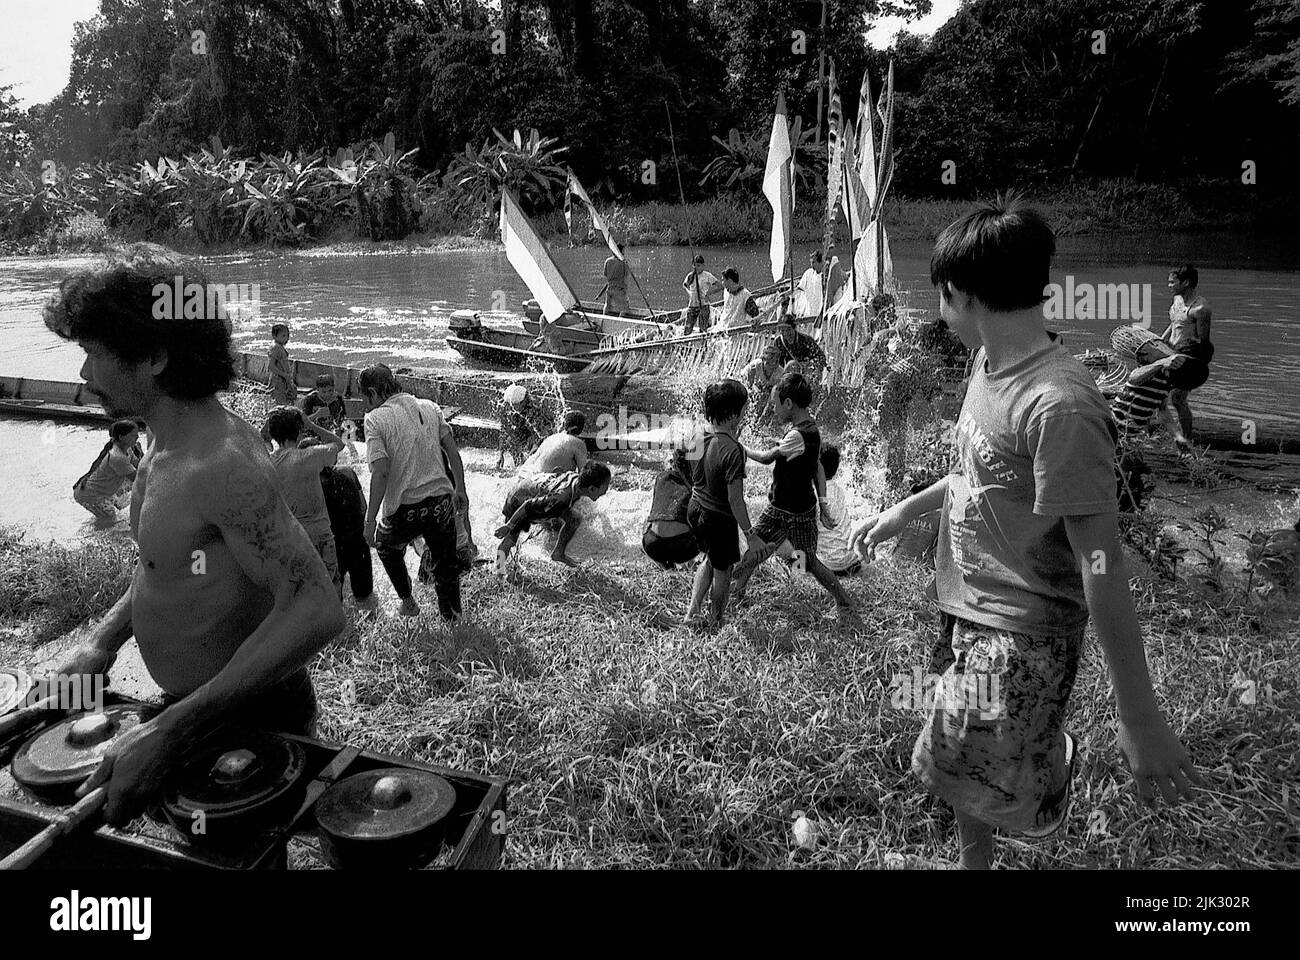 West Kalimantan, Indonesia. March 2007. A man unloads a set of gamelan percussive instrument, as he is walking past a crowd of people—Dayak Tamambaloh community—who is splashing water at each other as a purifying act, in front of a boat that have just carried the family of their new traditional chief for a visit to the burial site of their former chief in Sungai Uluk Palin (Sungulo Palin) village, Putusibau Utara, Kapuas Hulu, West Kalimantan, Indonesia. Culture is an indispensable part of any development, according to United Nations. Stock Photo